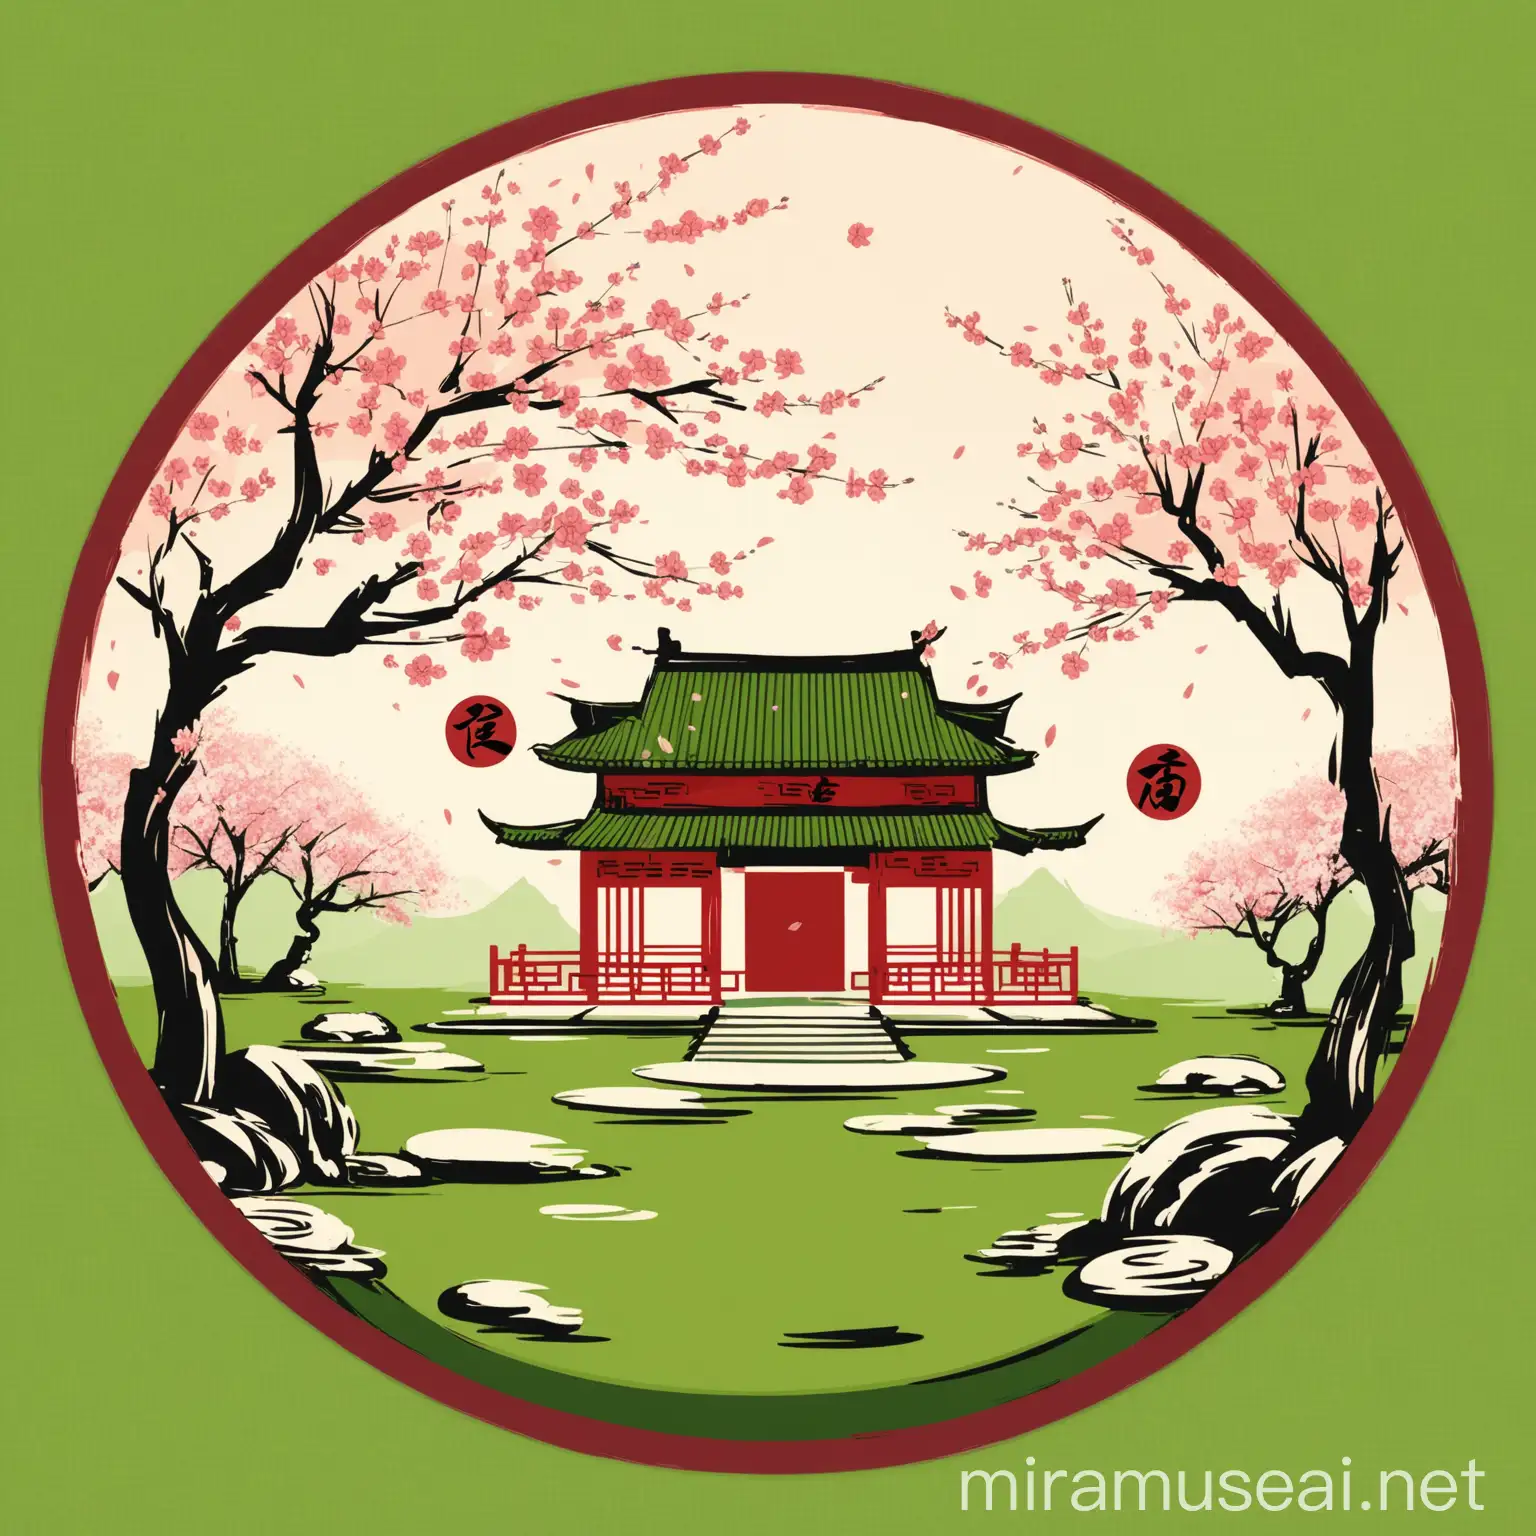 Round logo, Chinese tea house, cherry blossom trees. Green grass theme, Low detail, caligraphy strokes style